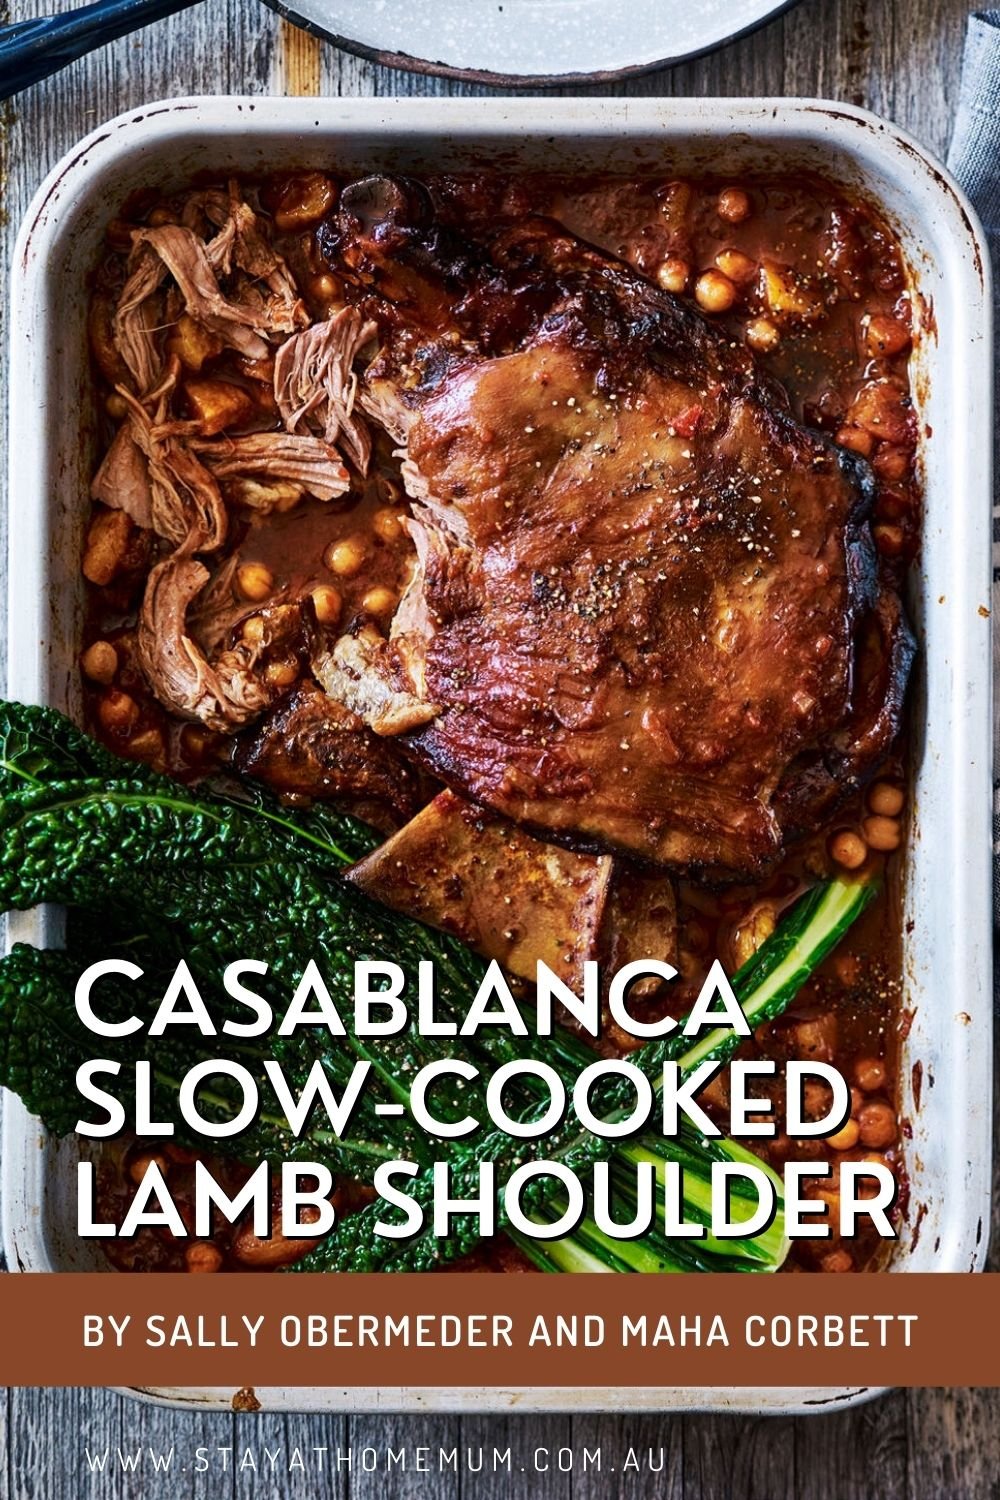 Casablanca Slow-Cooked Lamb Shoulder by Sally Obermeder and Maha Corbett | Stay at Home Mum